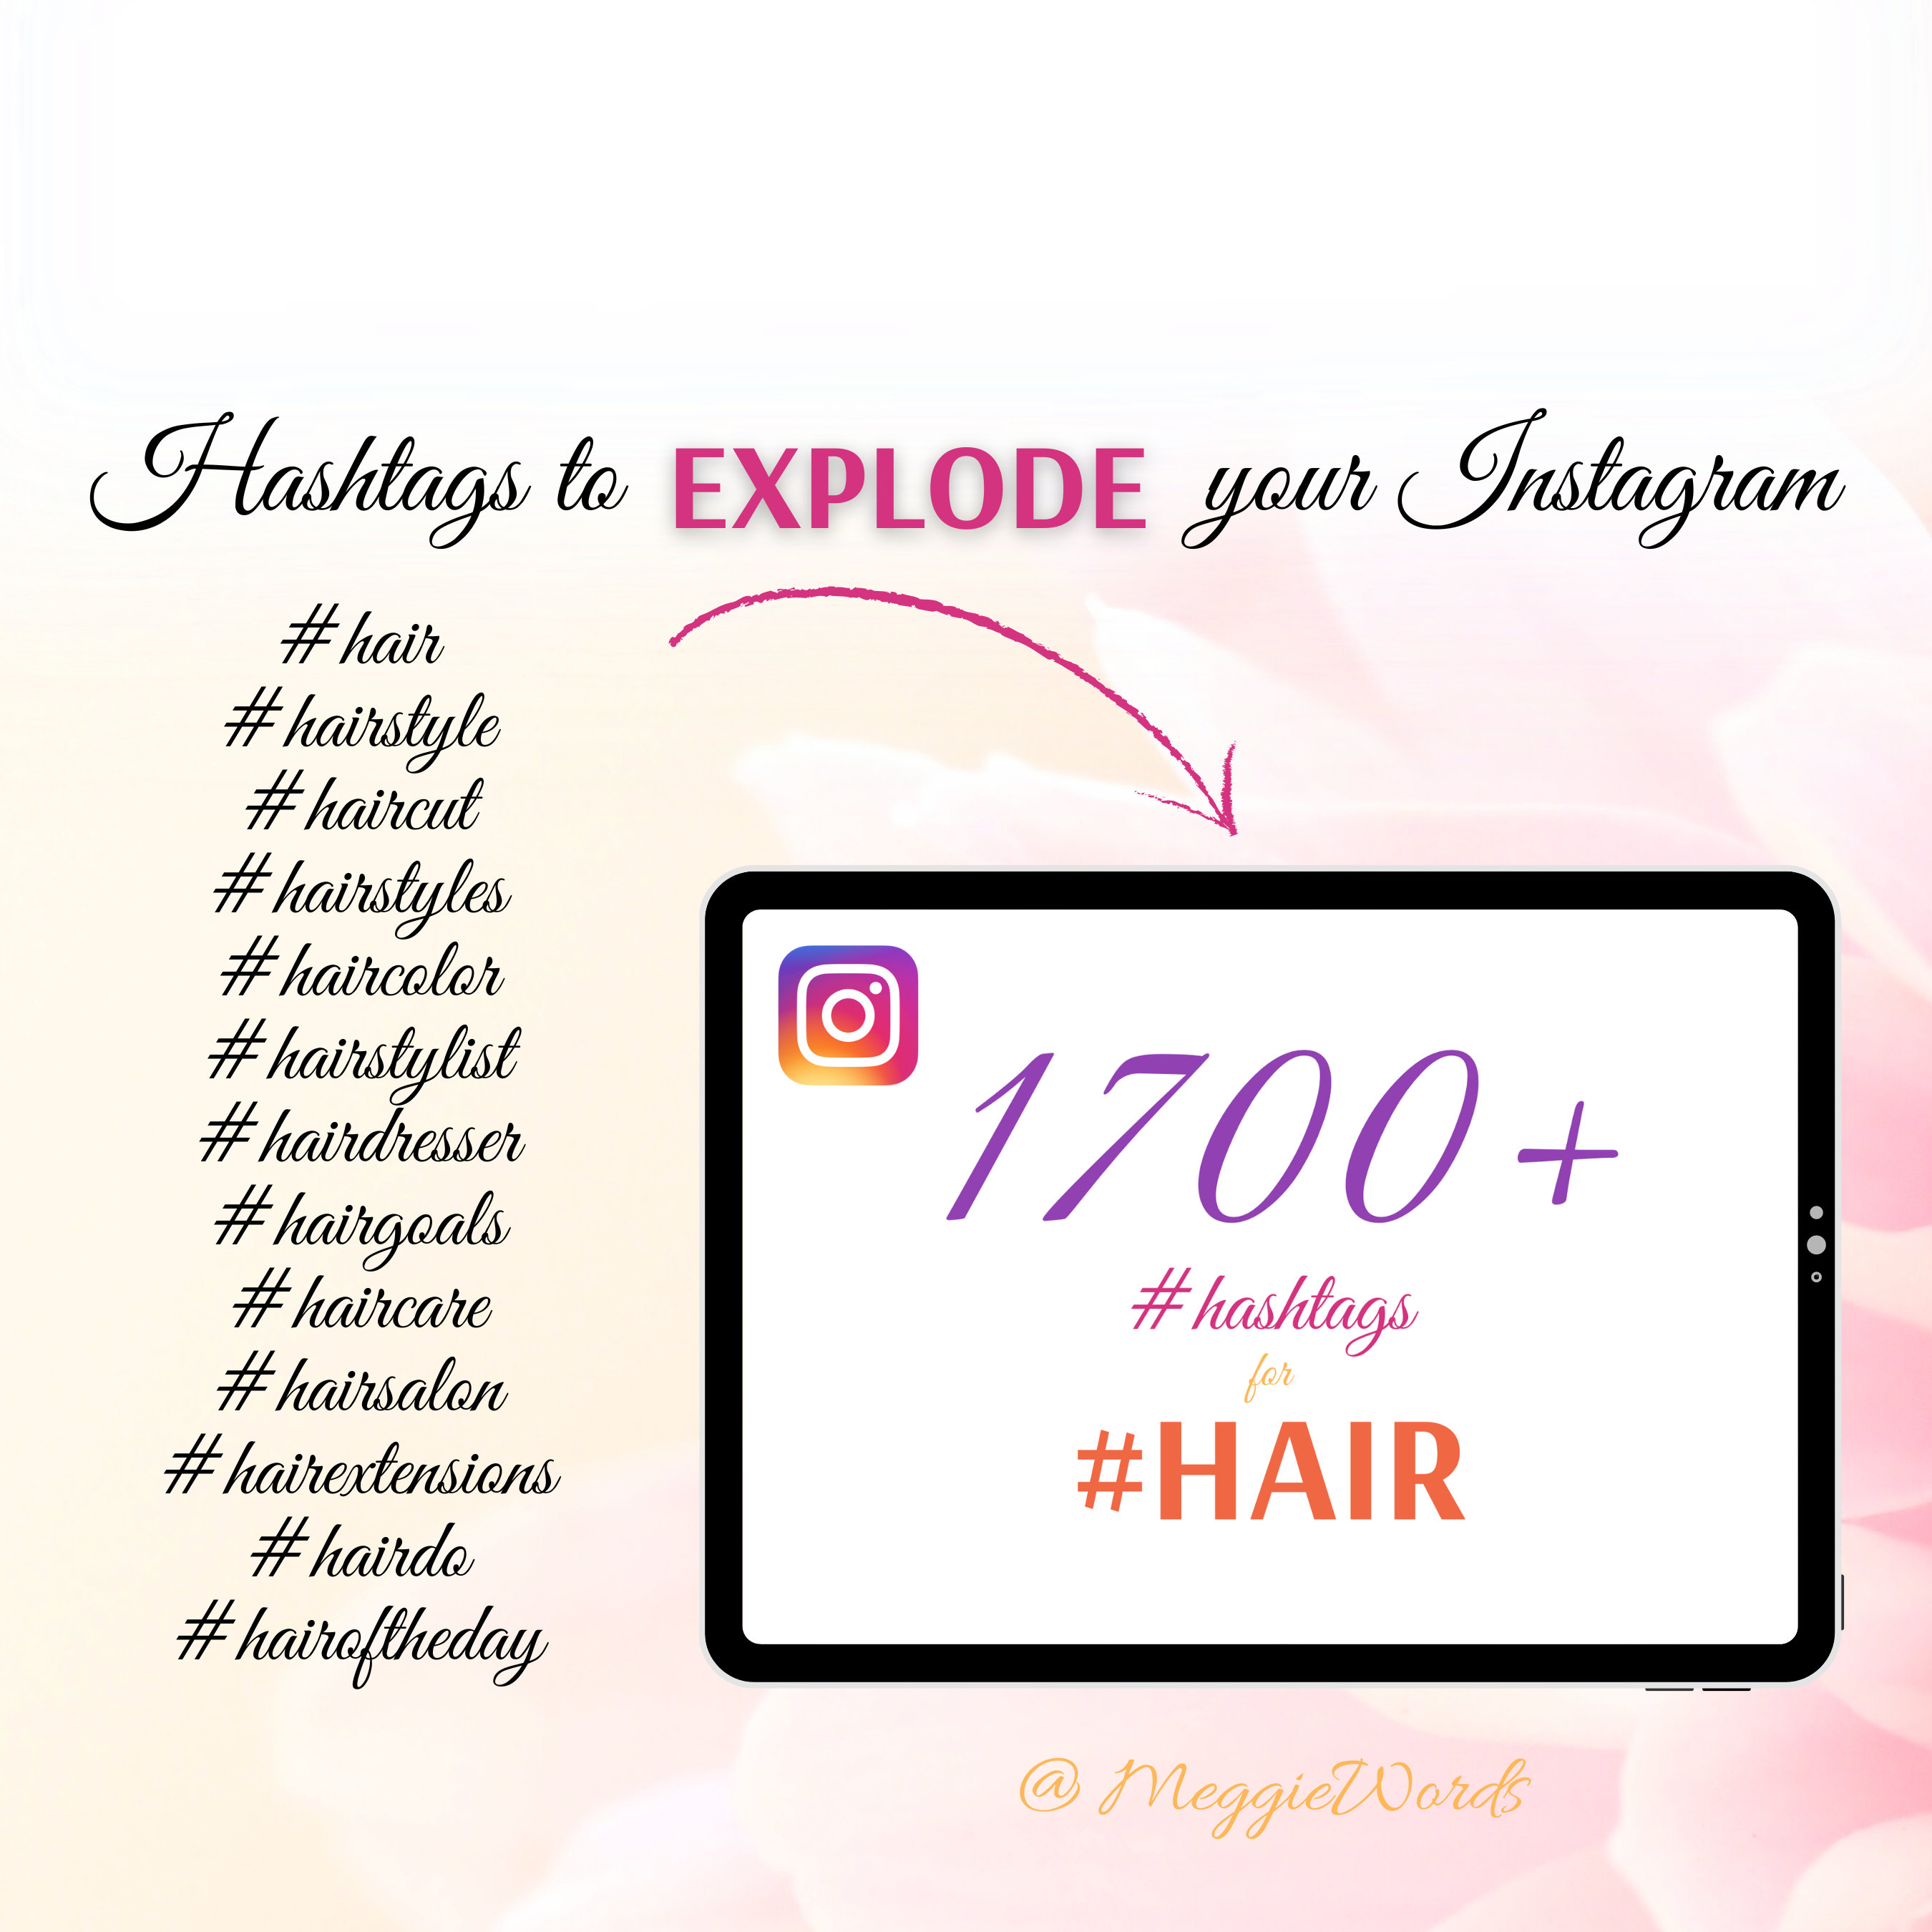 Barber Hashtags (to copy and paste) on Instagram & TikTok